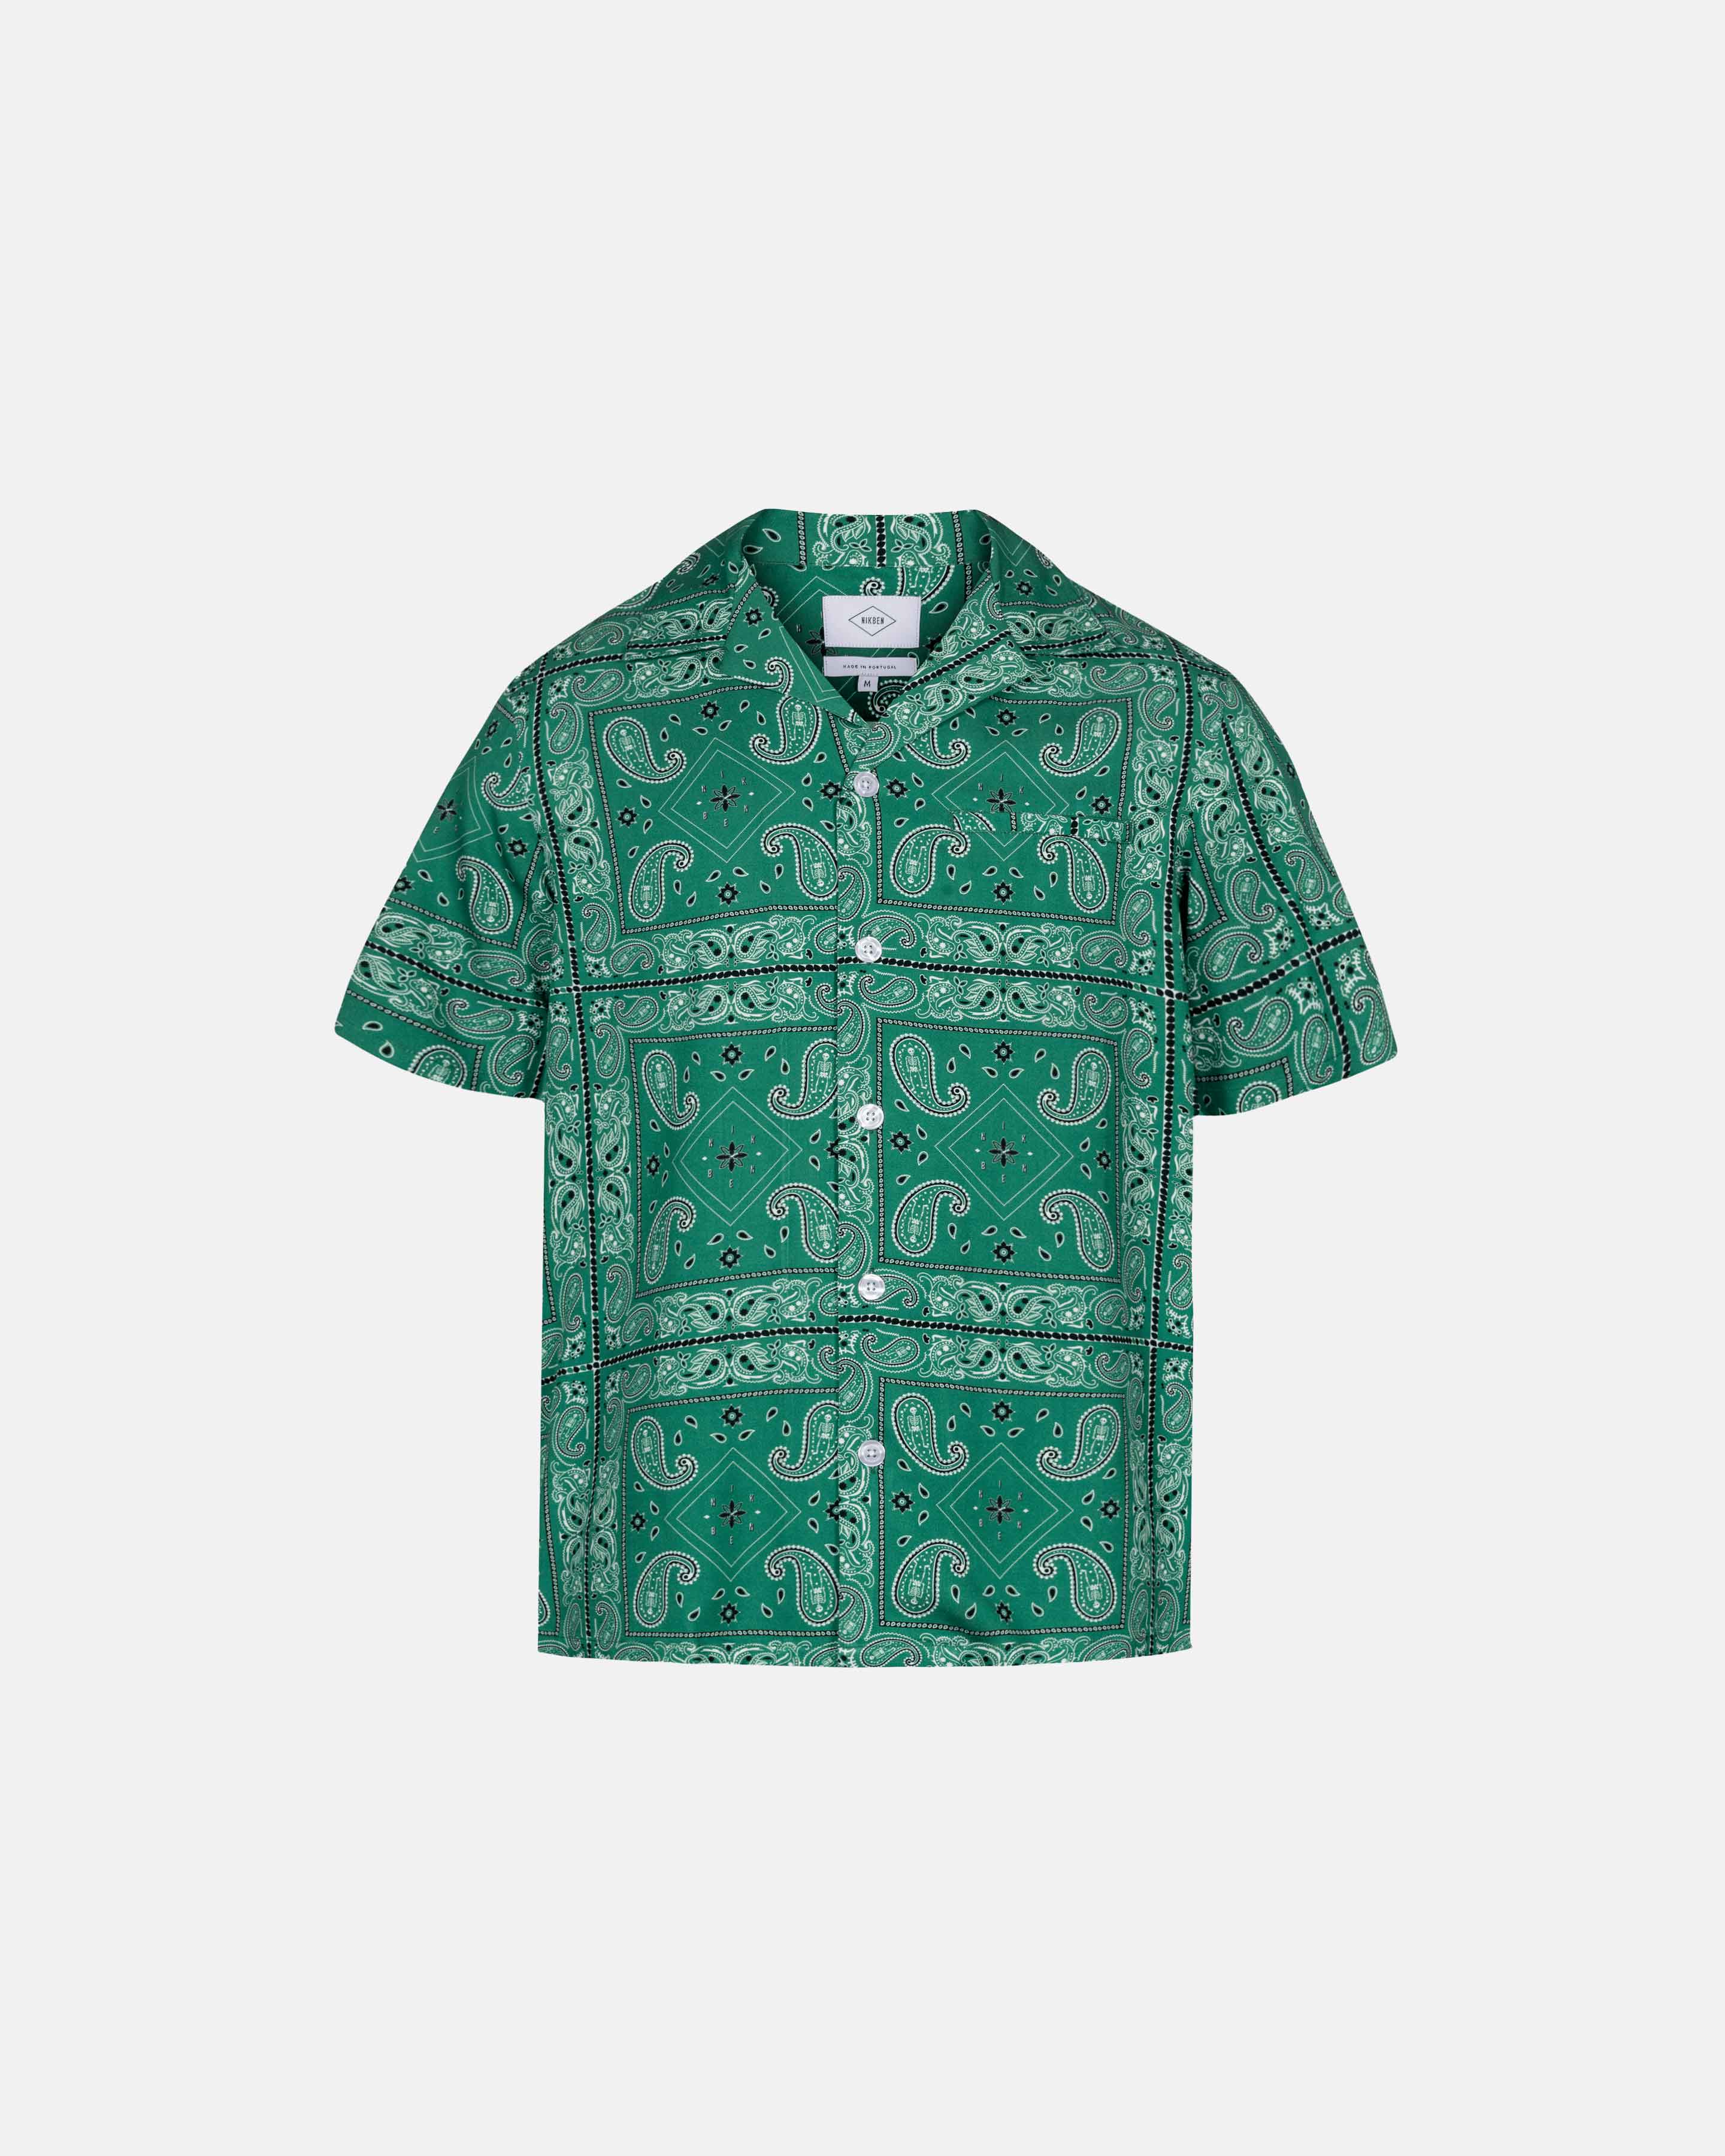 Green short sleeve vacation shirt with white pearl buttons